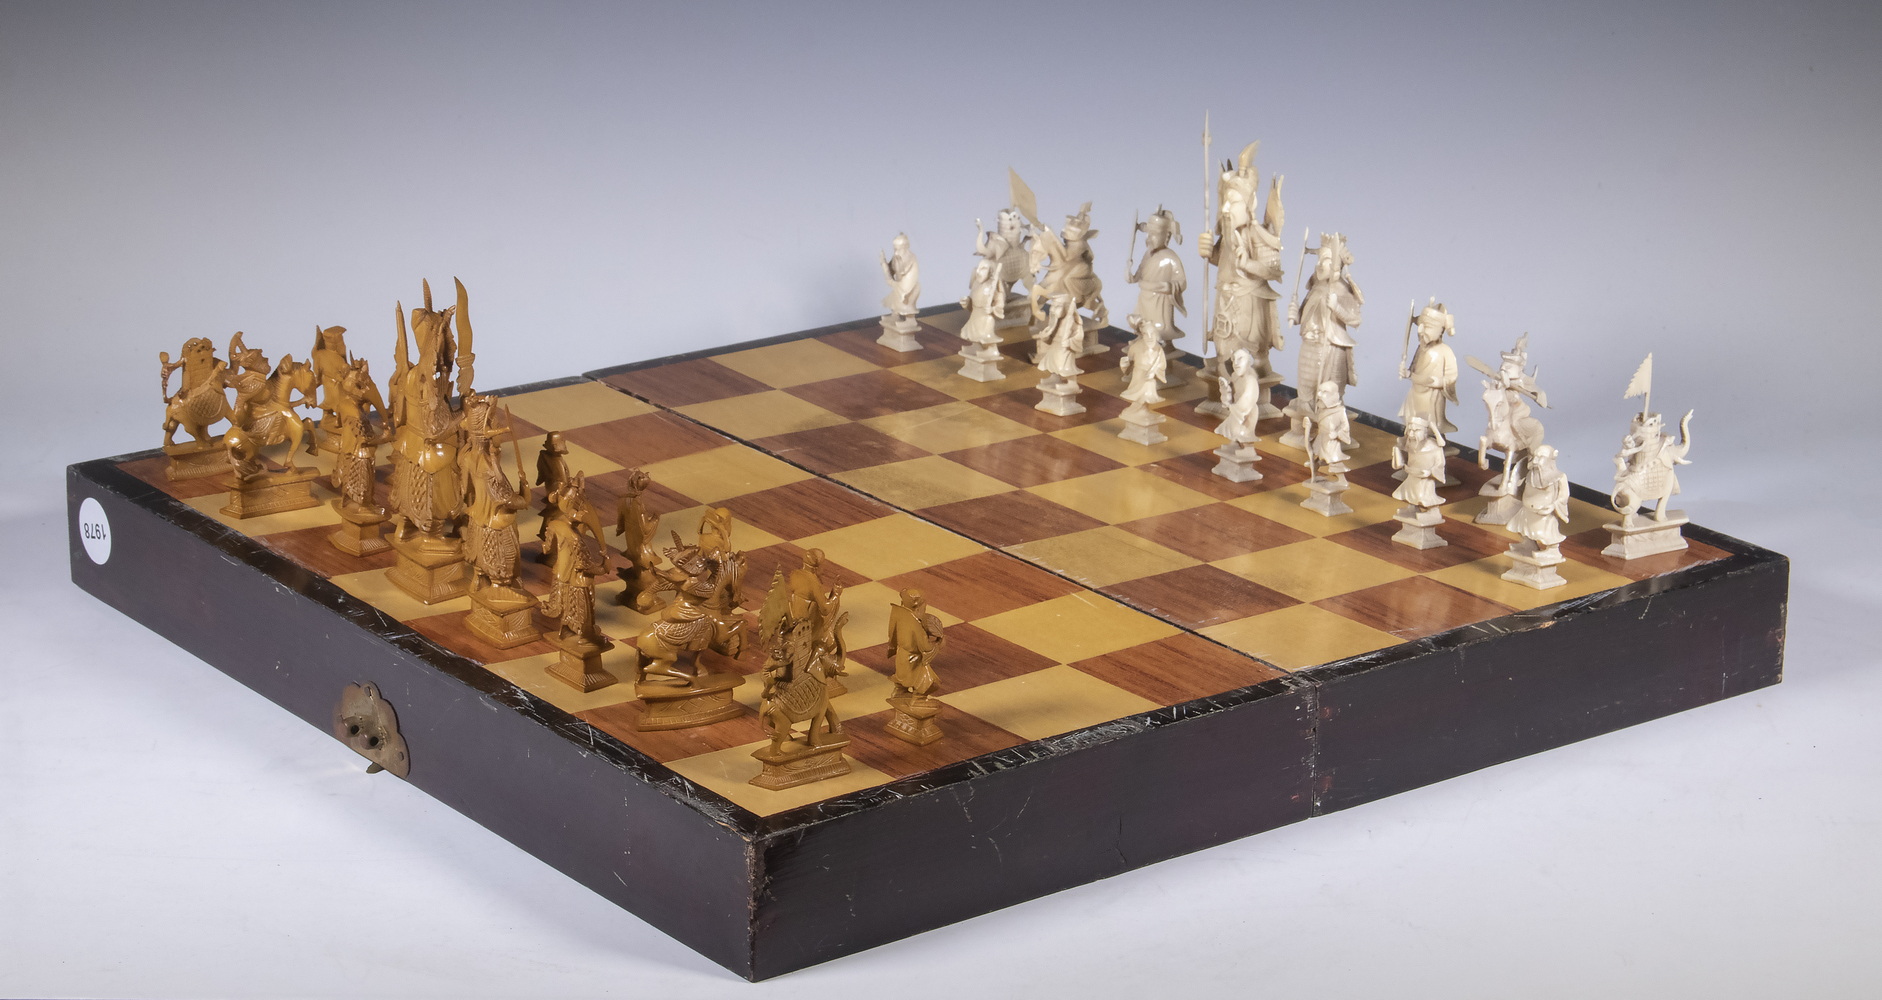 CHINESE CASED CHESS SET A large 29e428